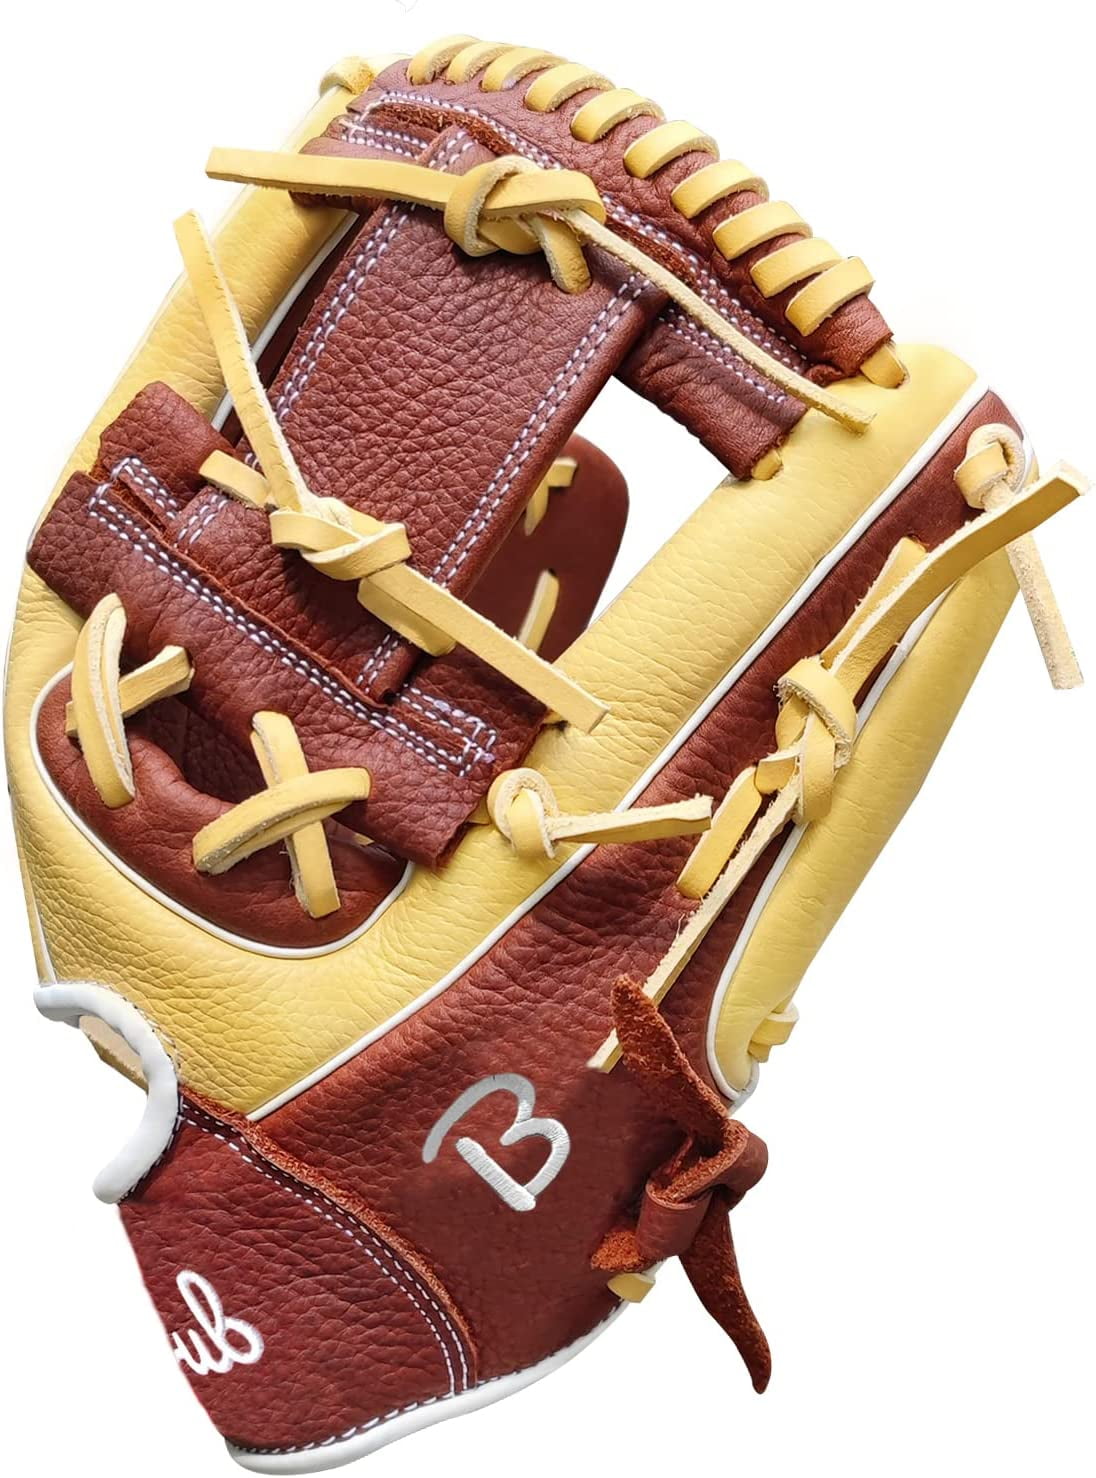 Beoub Baseball Softball Glove Full Grain Leather Youth Adults Mens Women 11.5 Inch Left Handed Throw I Web Infield Fielding Mitts Junior Youth Fastpitch Slowpitch Glove Gifts